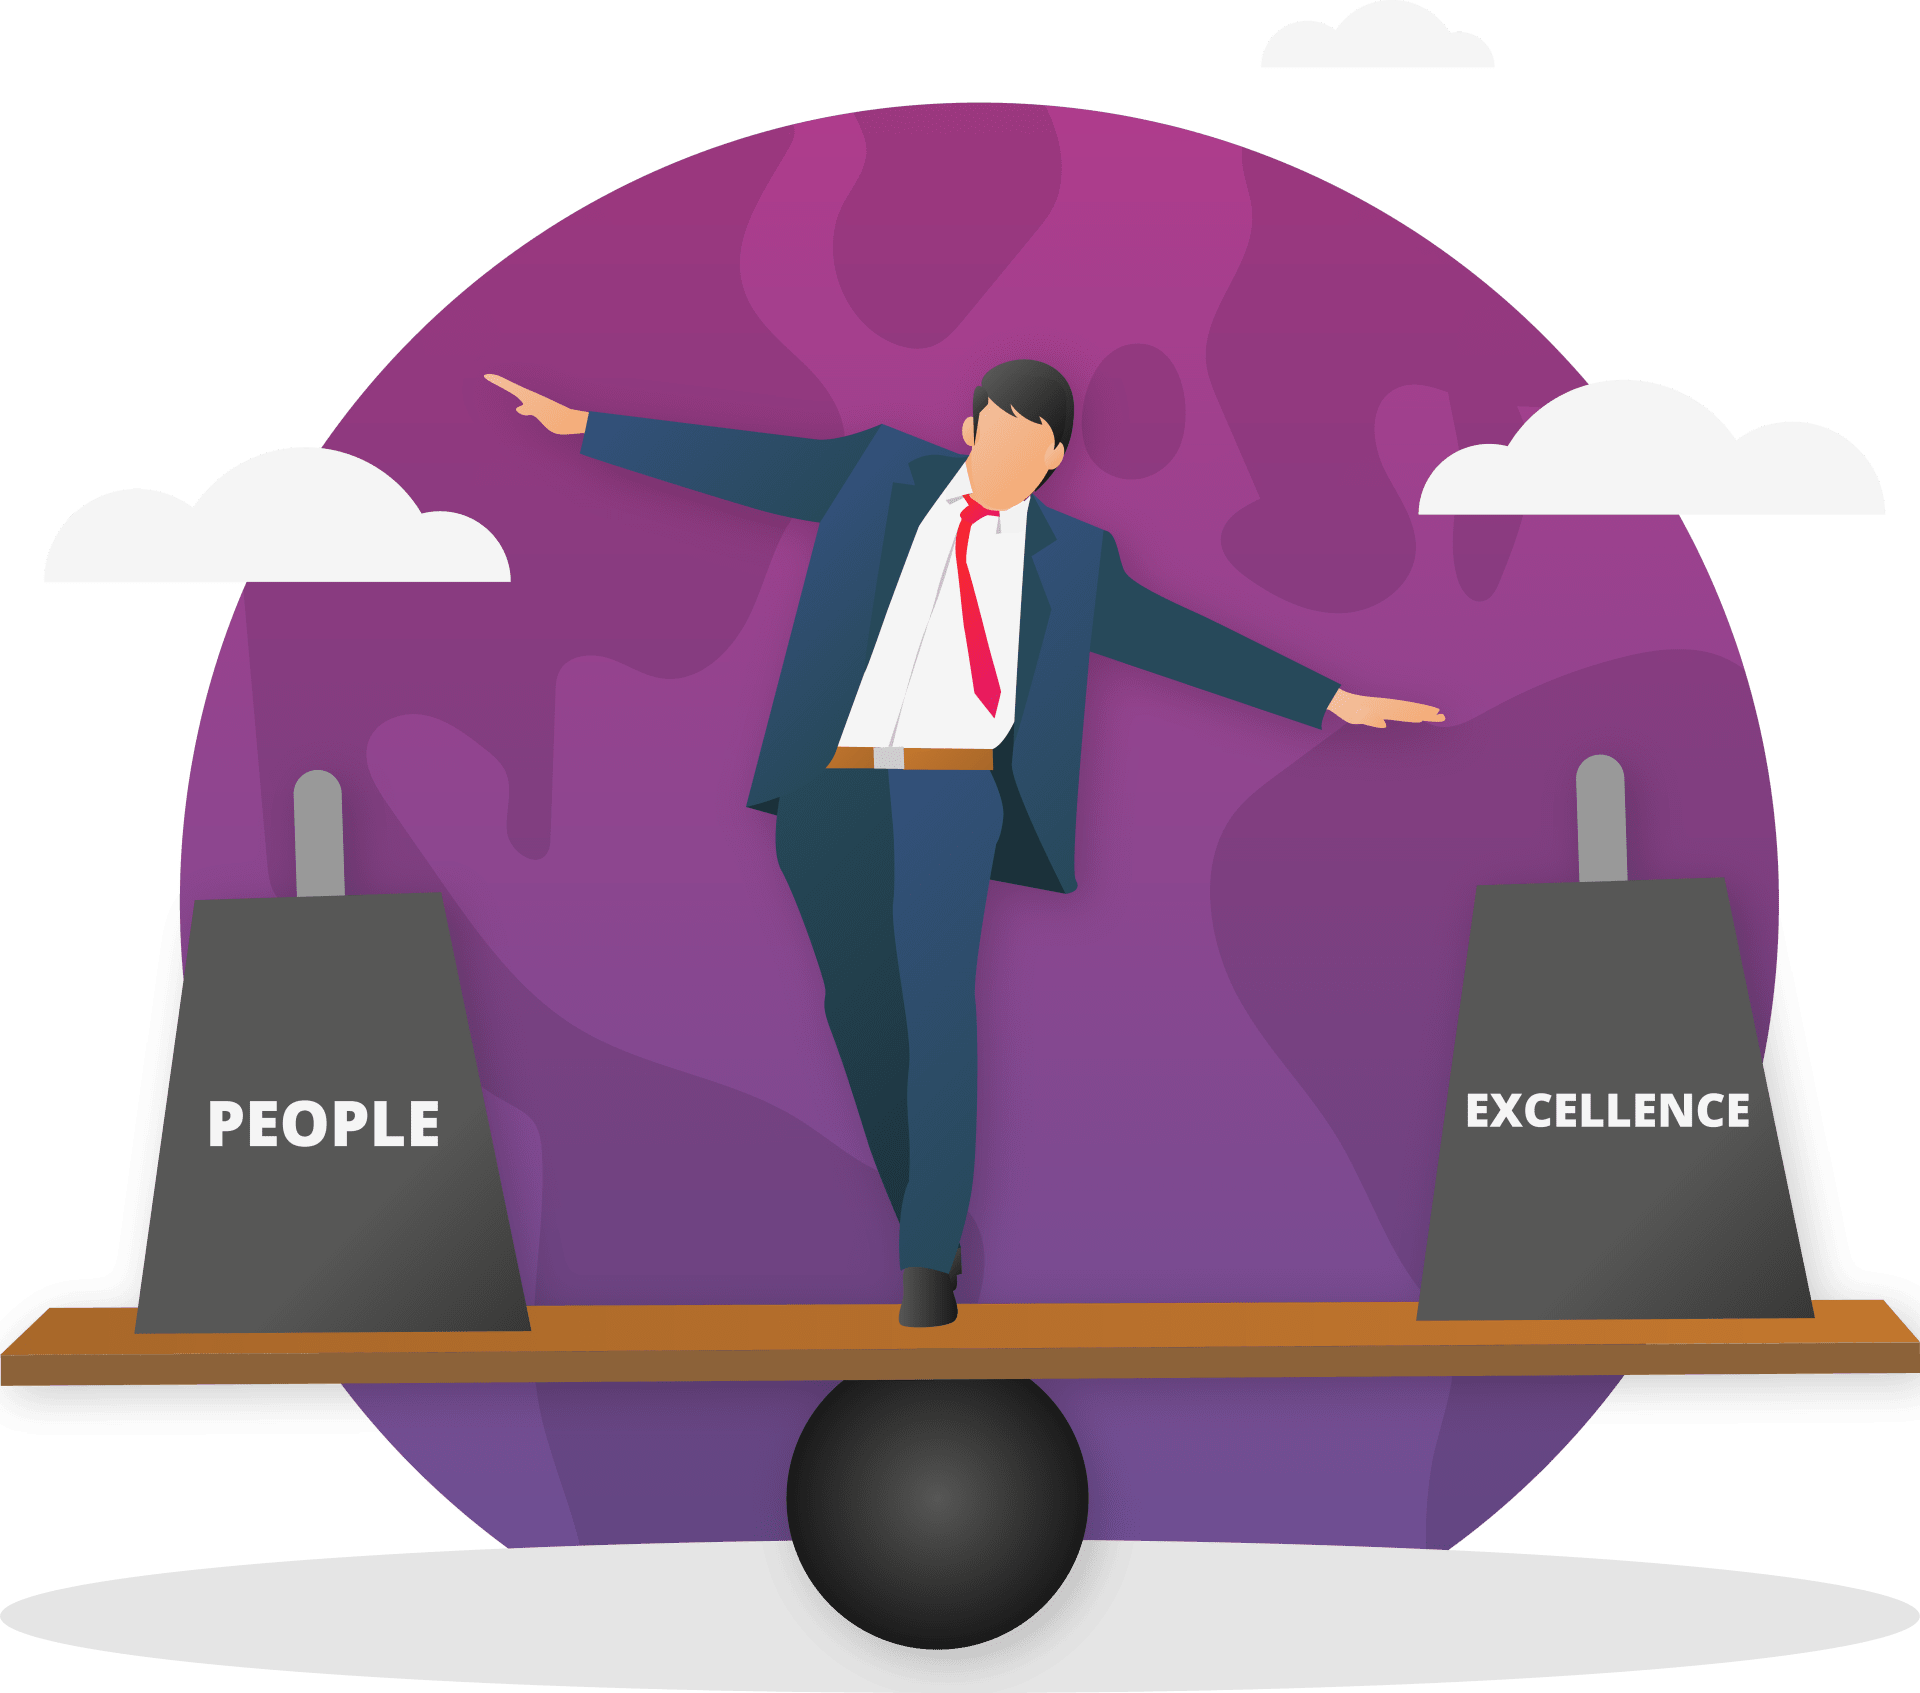 flat image of our balance between people and excellence